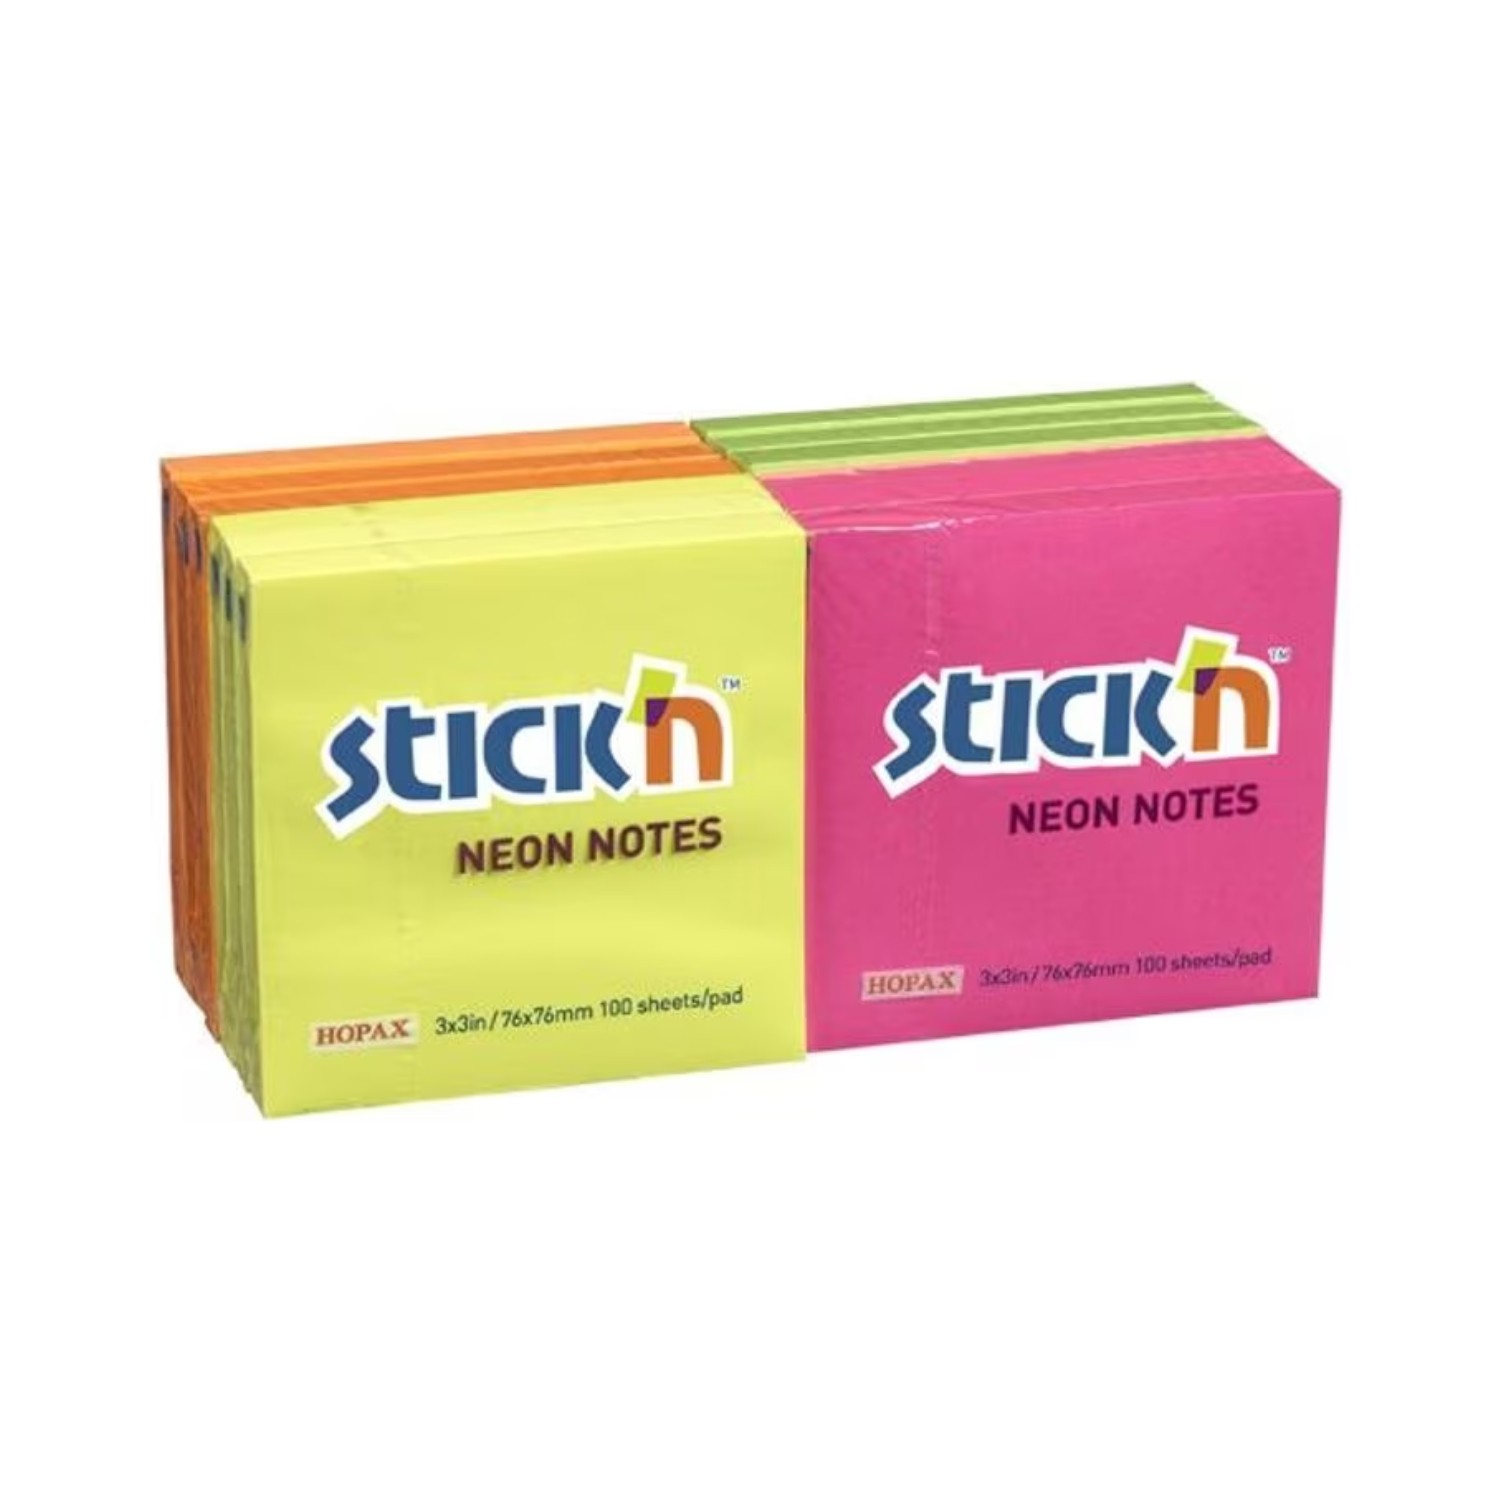 Stick+%27n+Neon+Notes+76+x+127mm+Assorted